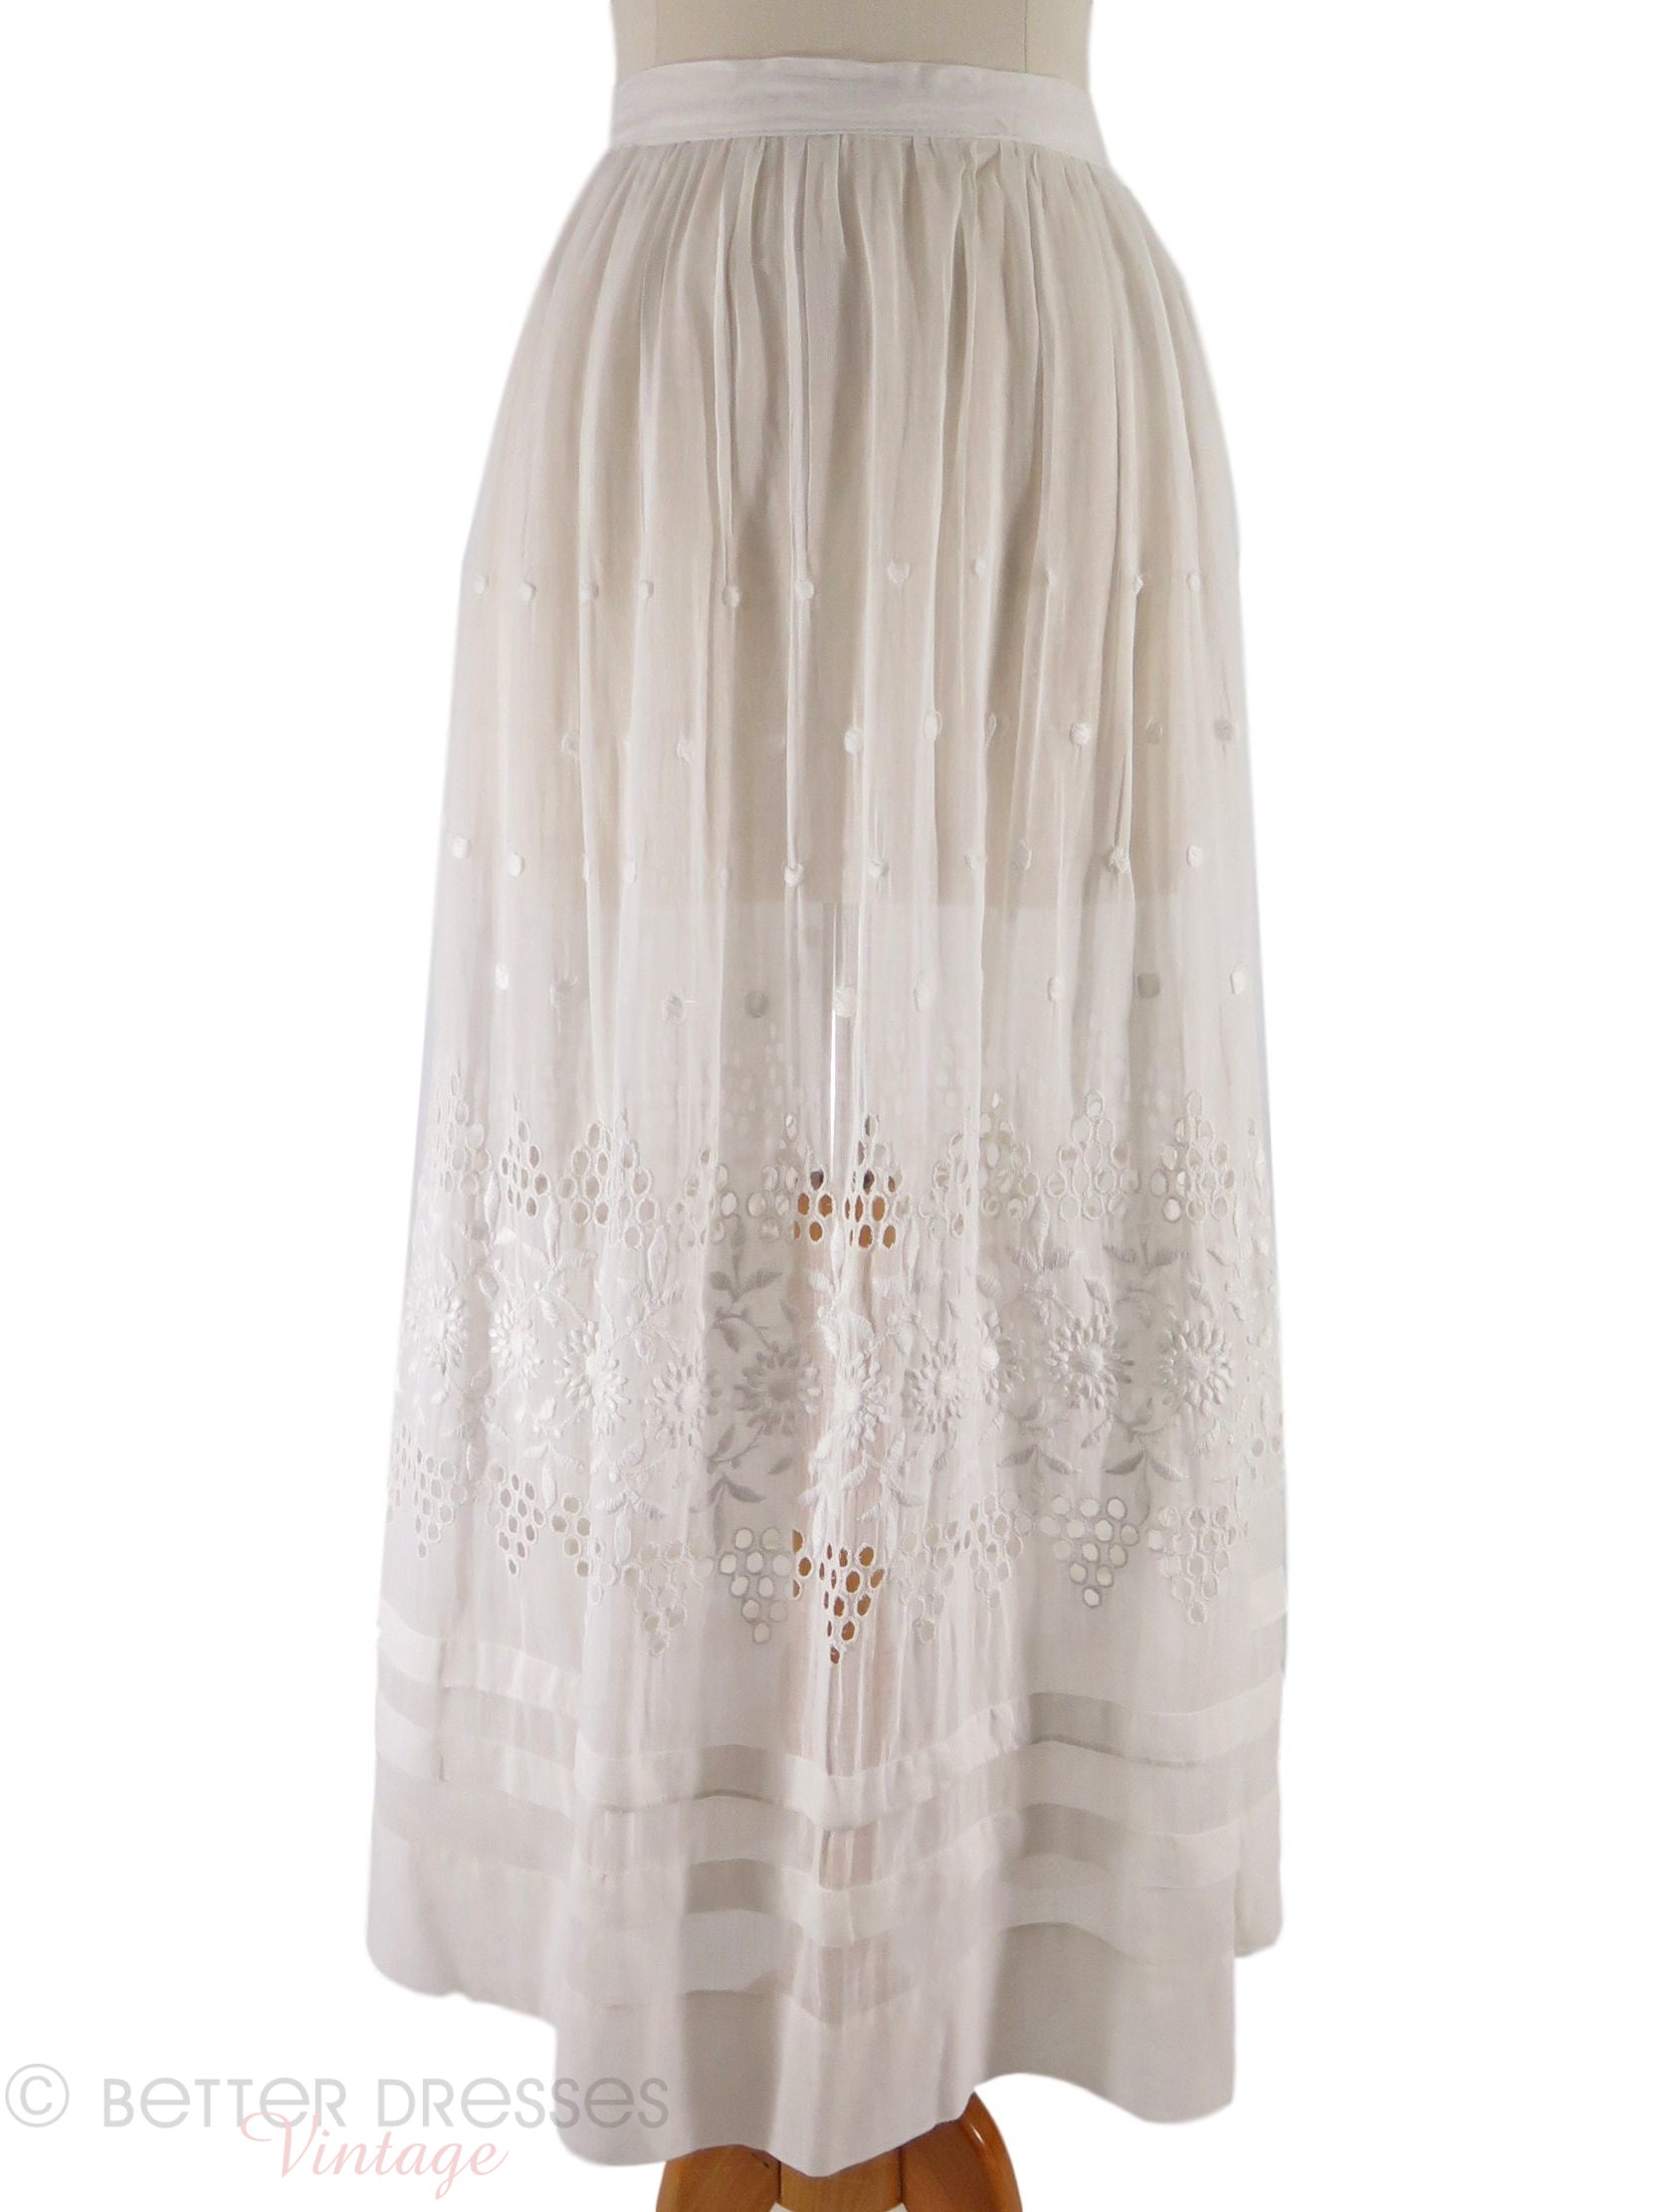 Edwardian White Cotton Lawn Embroidered Petticoat or Skirt - xs, sm ...